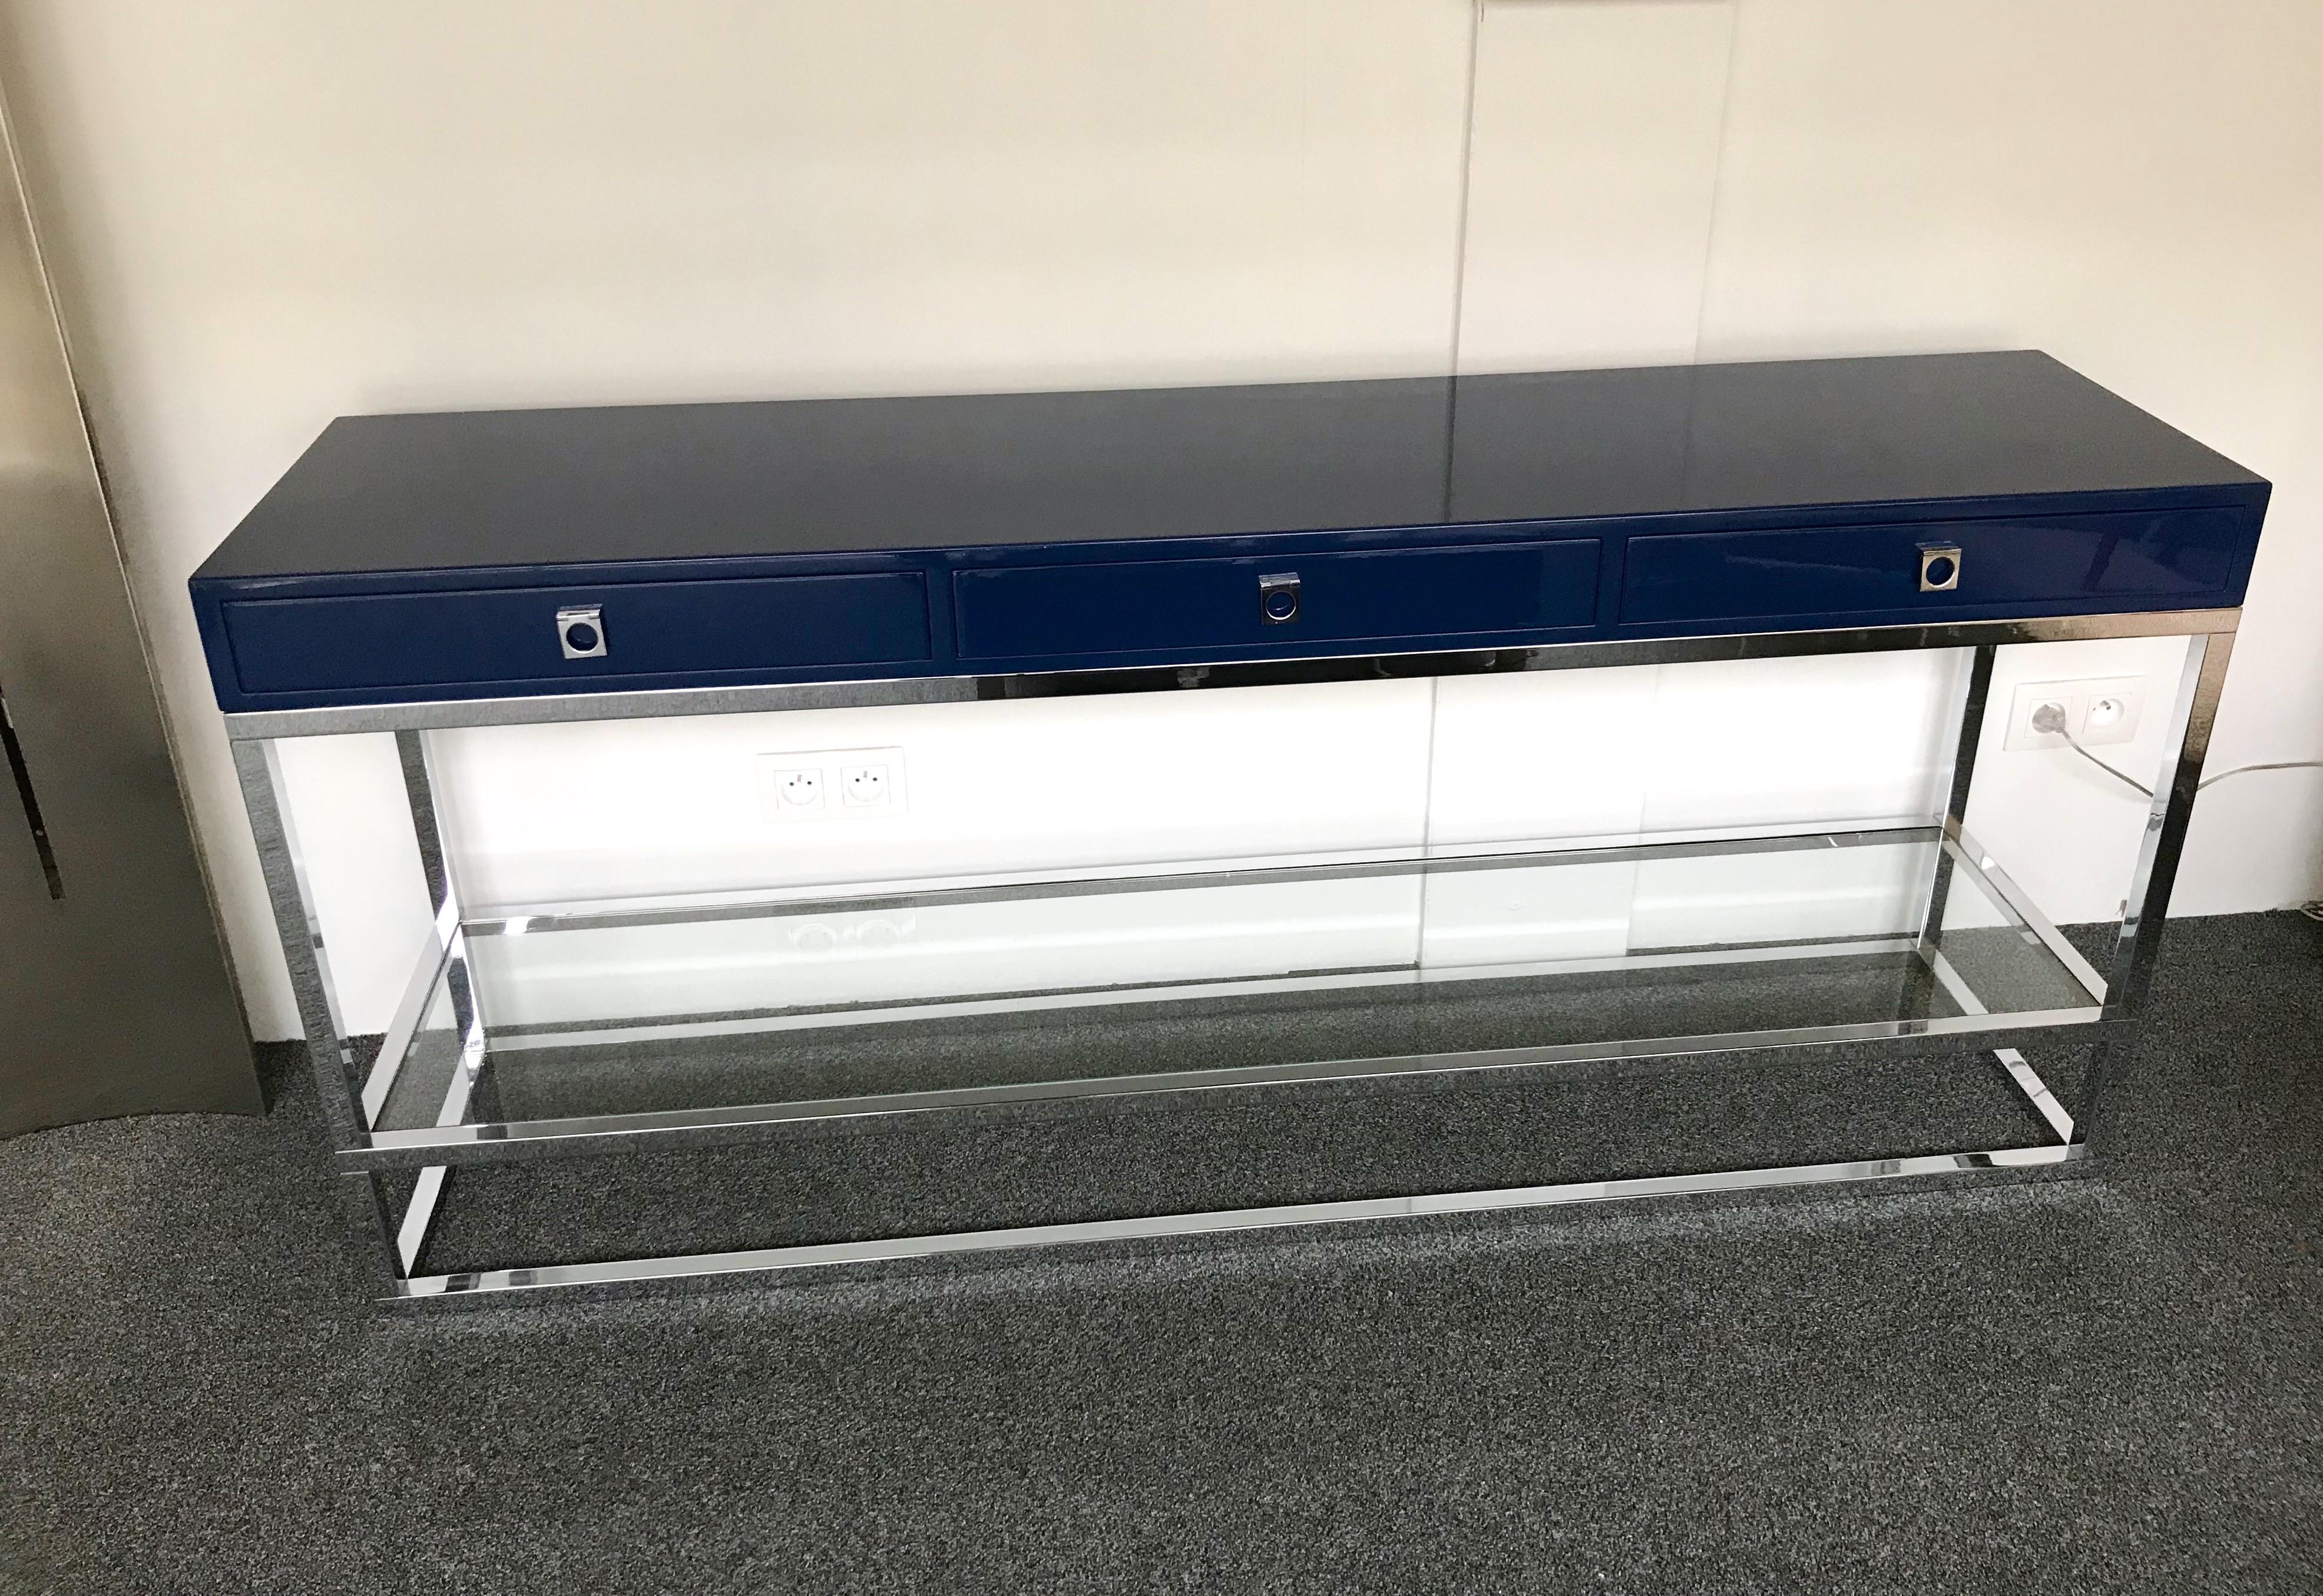 Rare long model of lacquered console table with 3 drawers in a blue lacquer, polished nickled brass feet and handle, low glass shelf by the designer Guy Lefevre for Maison Jansen. Special feet from the late 1970s in the Lefevre production, was